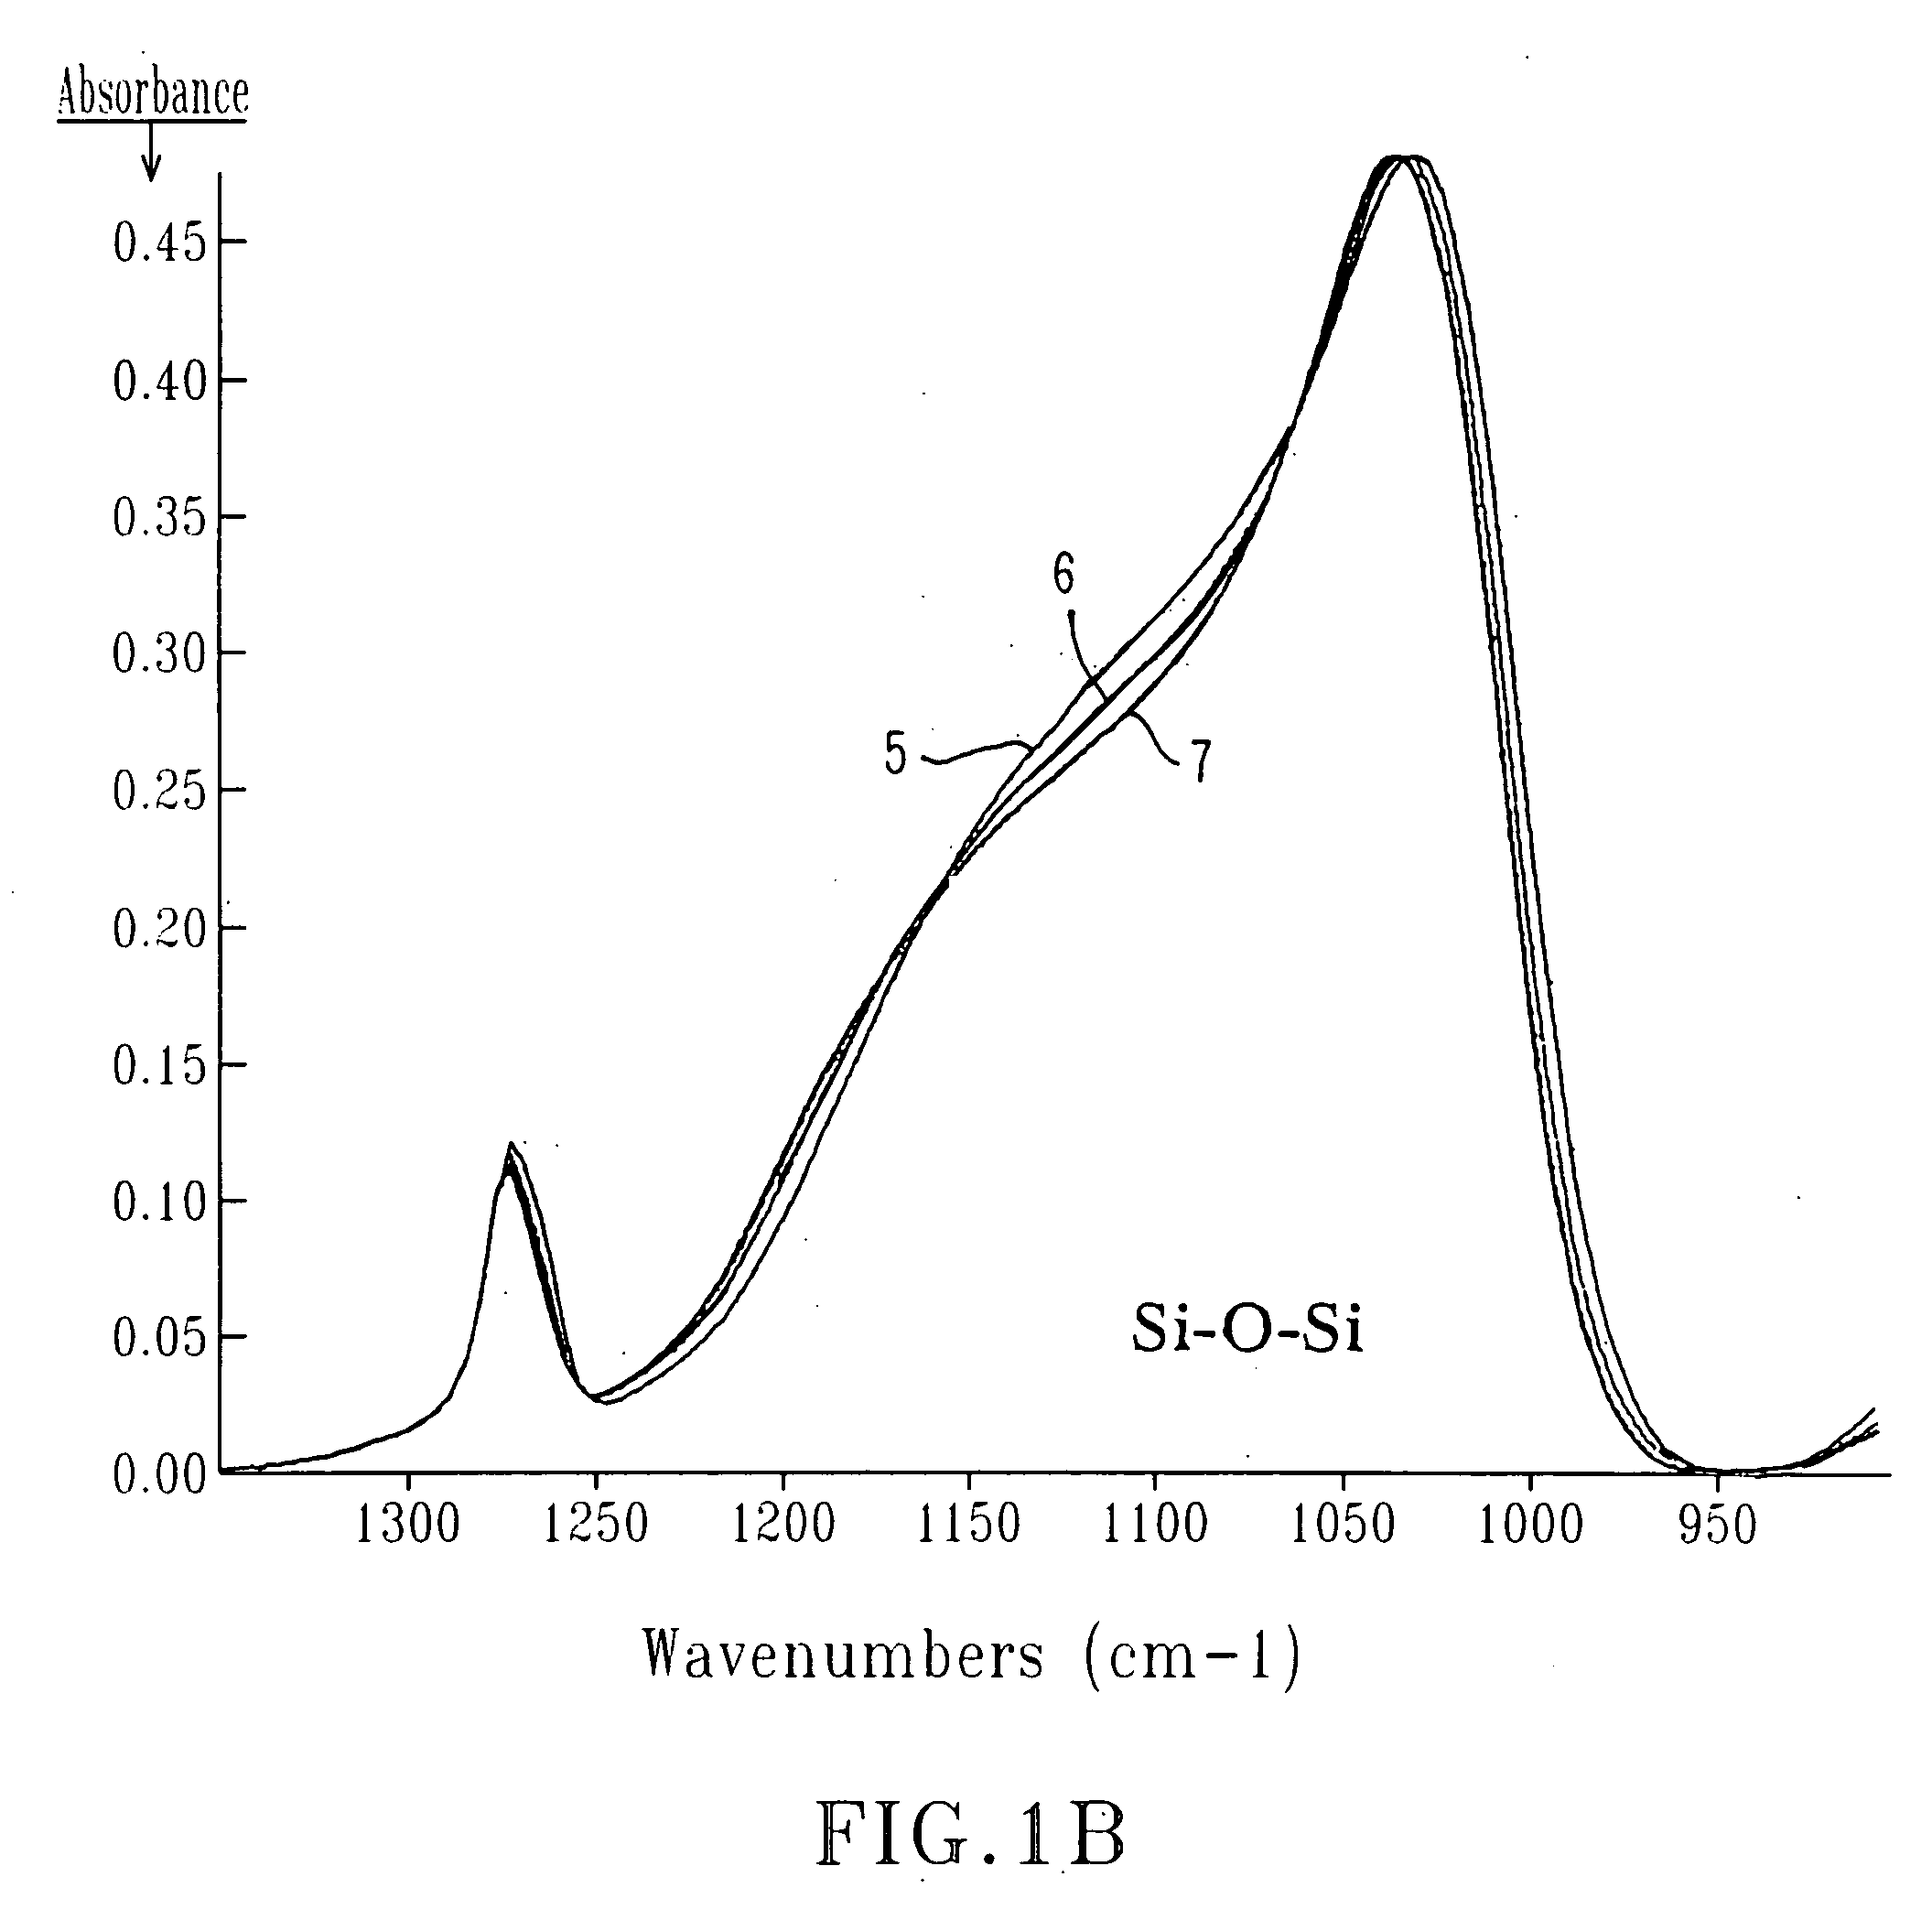 Low k and ultra low k SiCOH dielectric films and methods to form the same